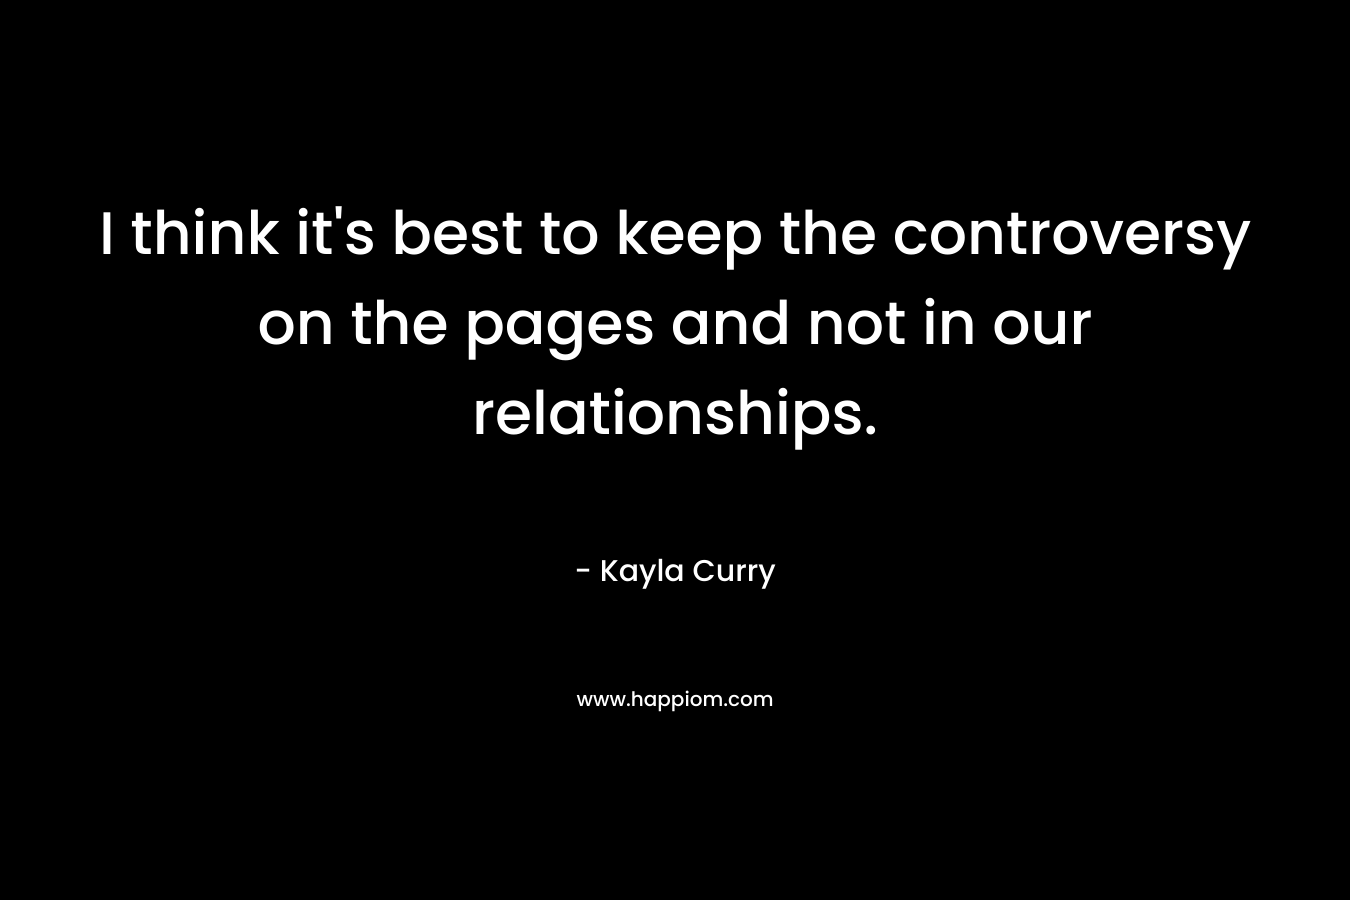 I think it’s best to keep the controversy on the pages and not in our relationships. – Kayla Curry